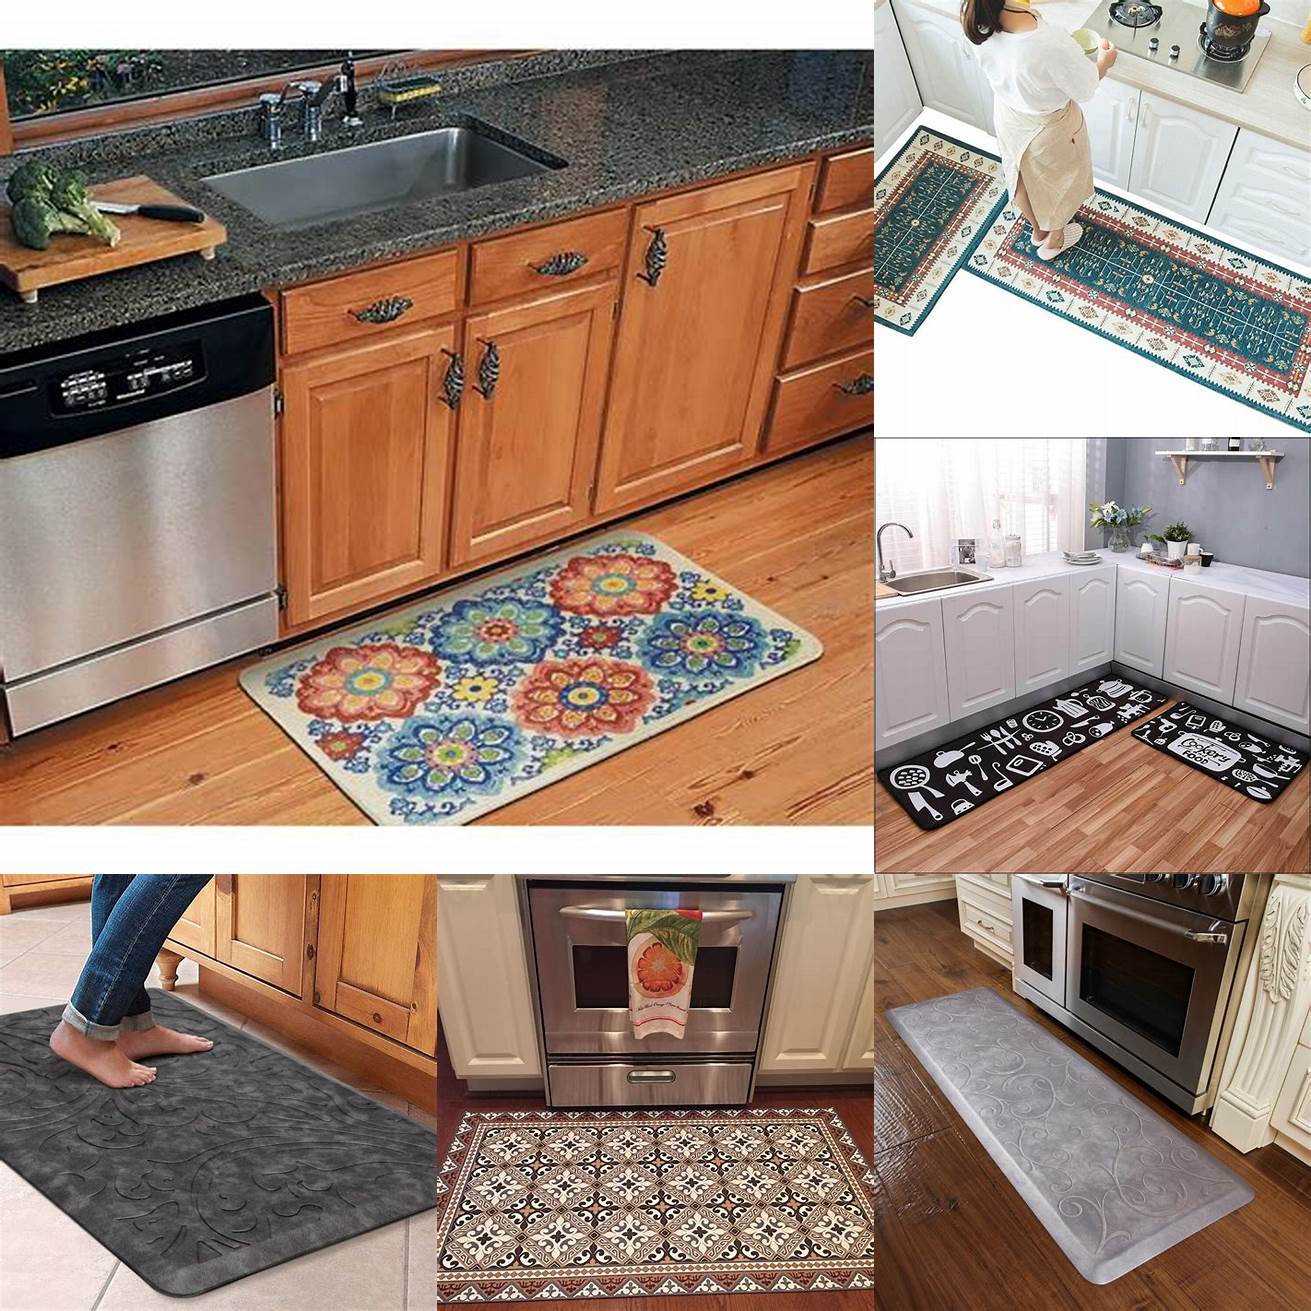 4 Decorative Mats These mats come in different colors and designs and are ideal for adding a touch of style to your kitchen